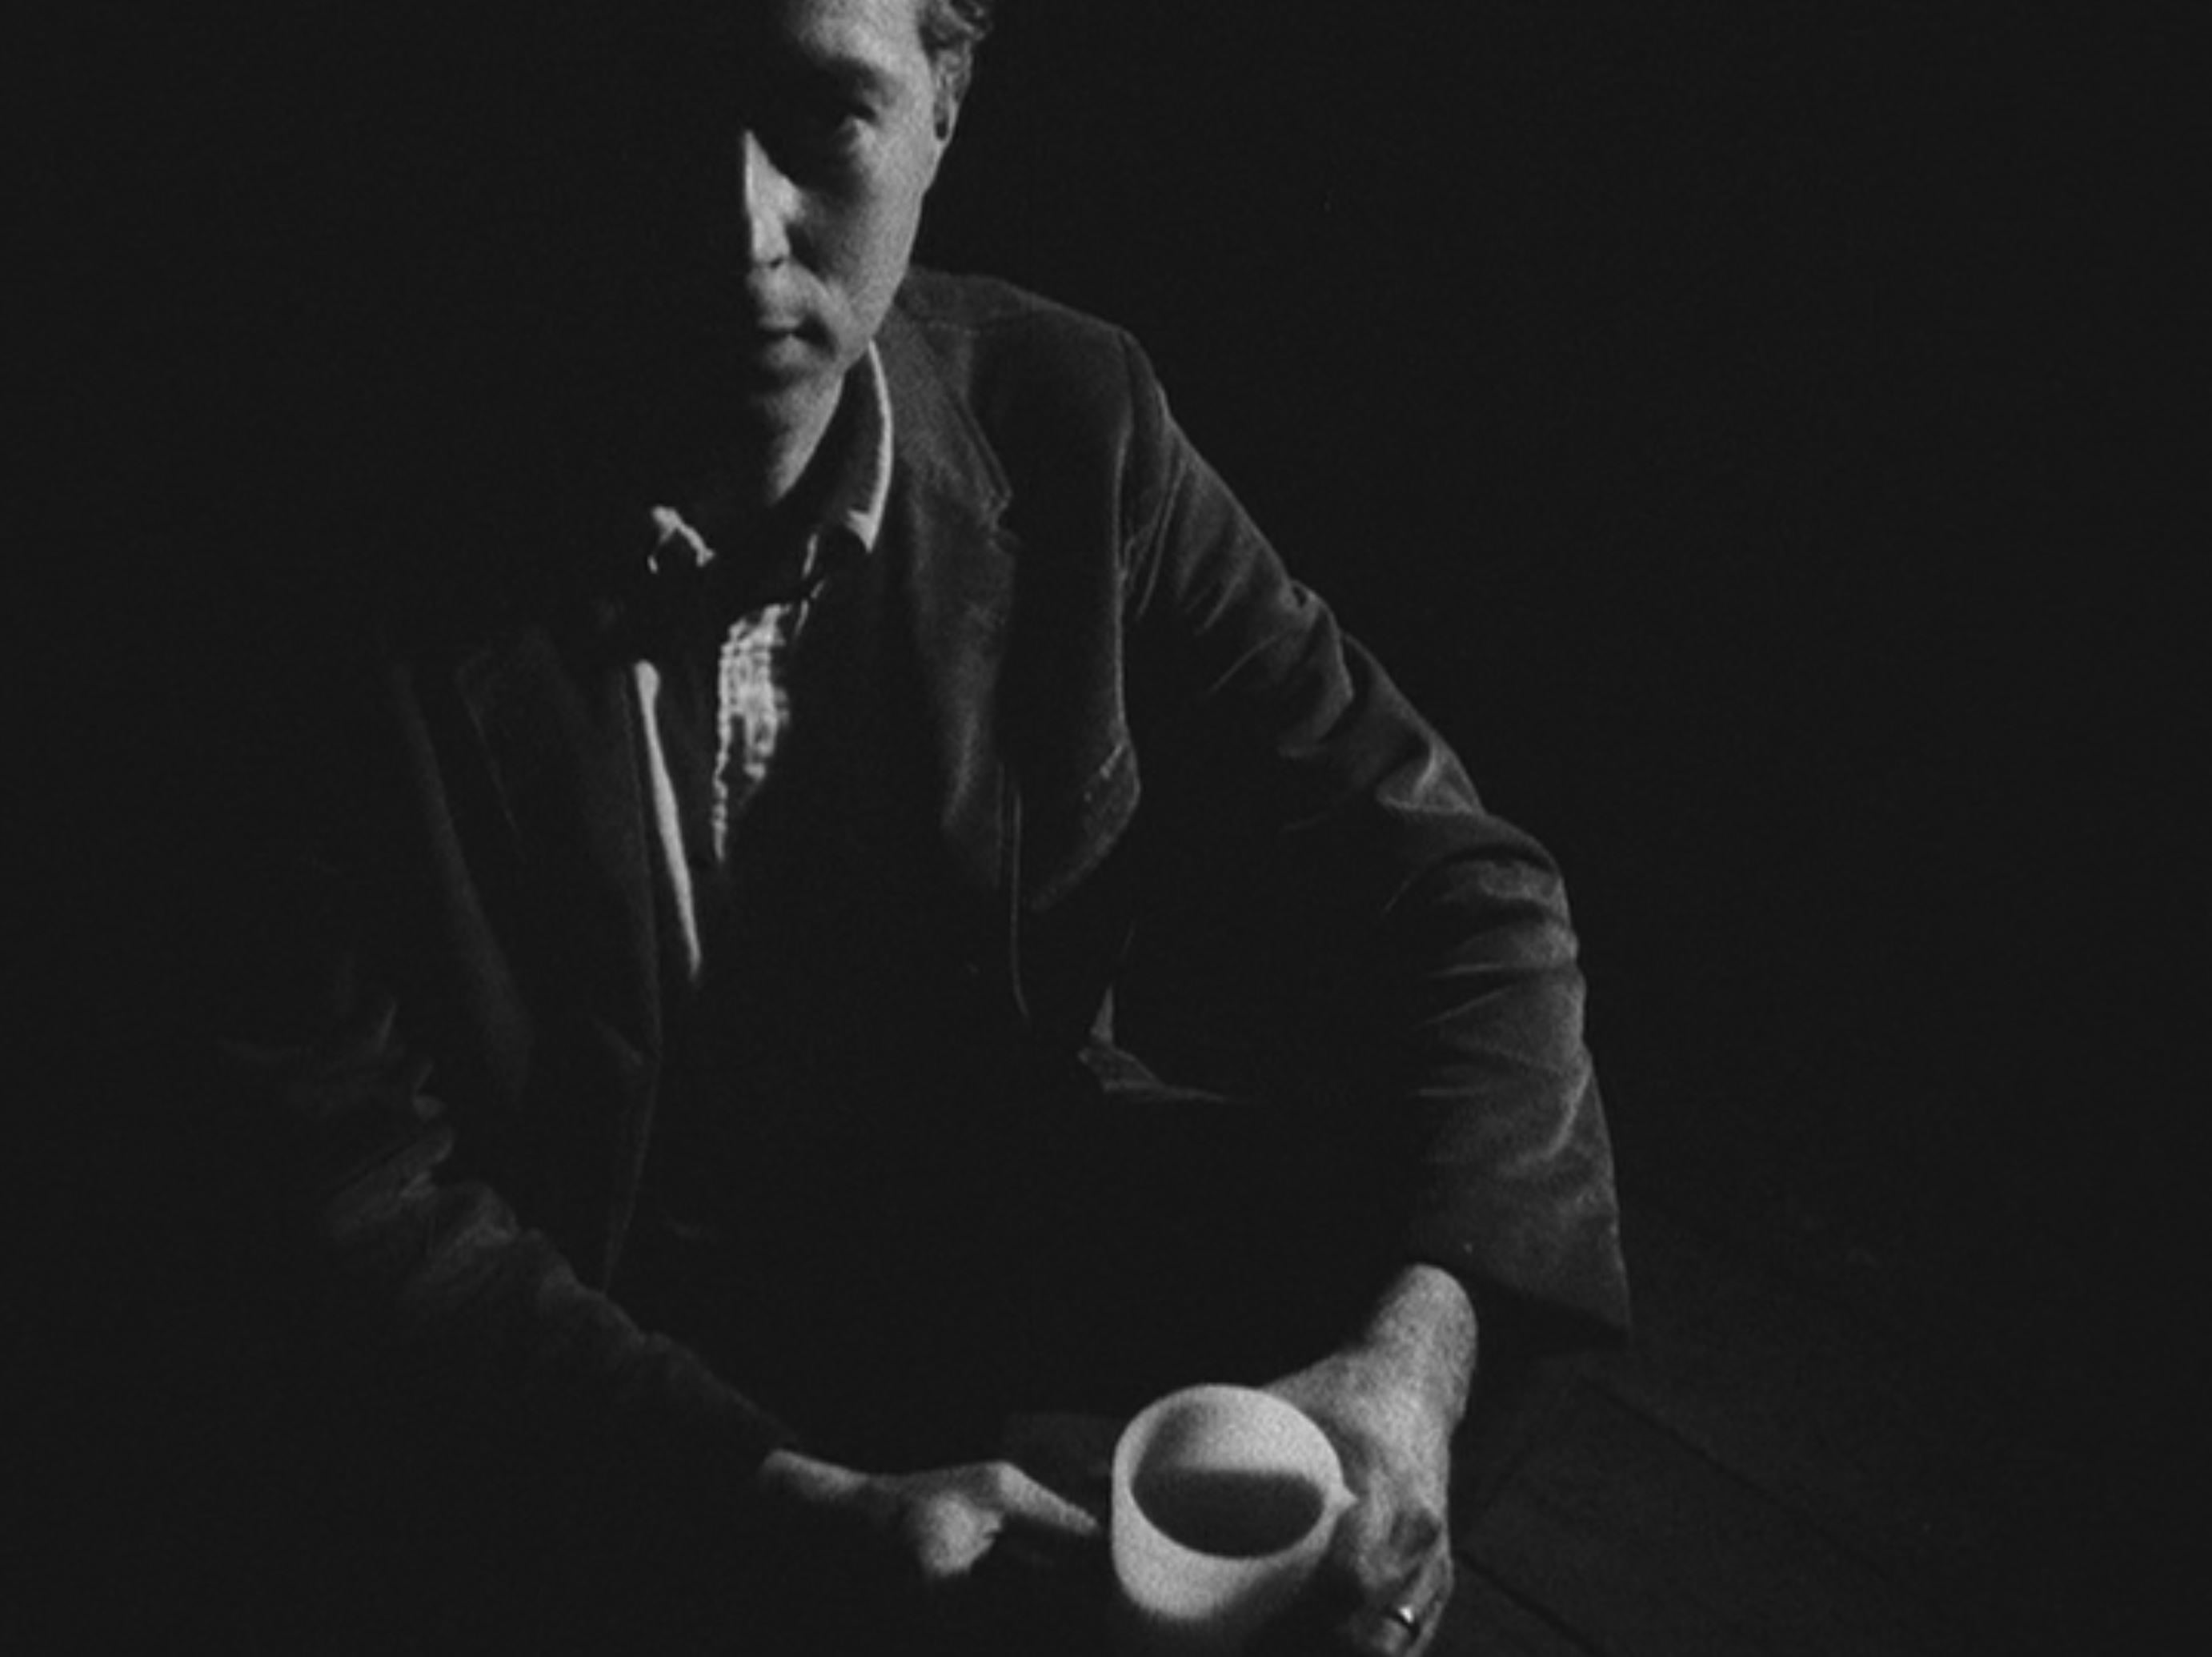 A black-and-white image of a man, apparently seated, holding a cup. Much of his face and body is shrouded in darkness.